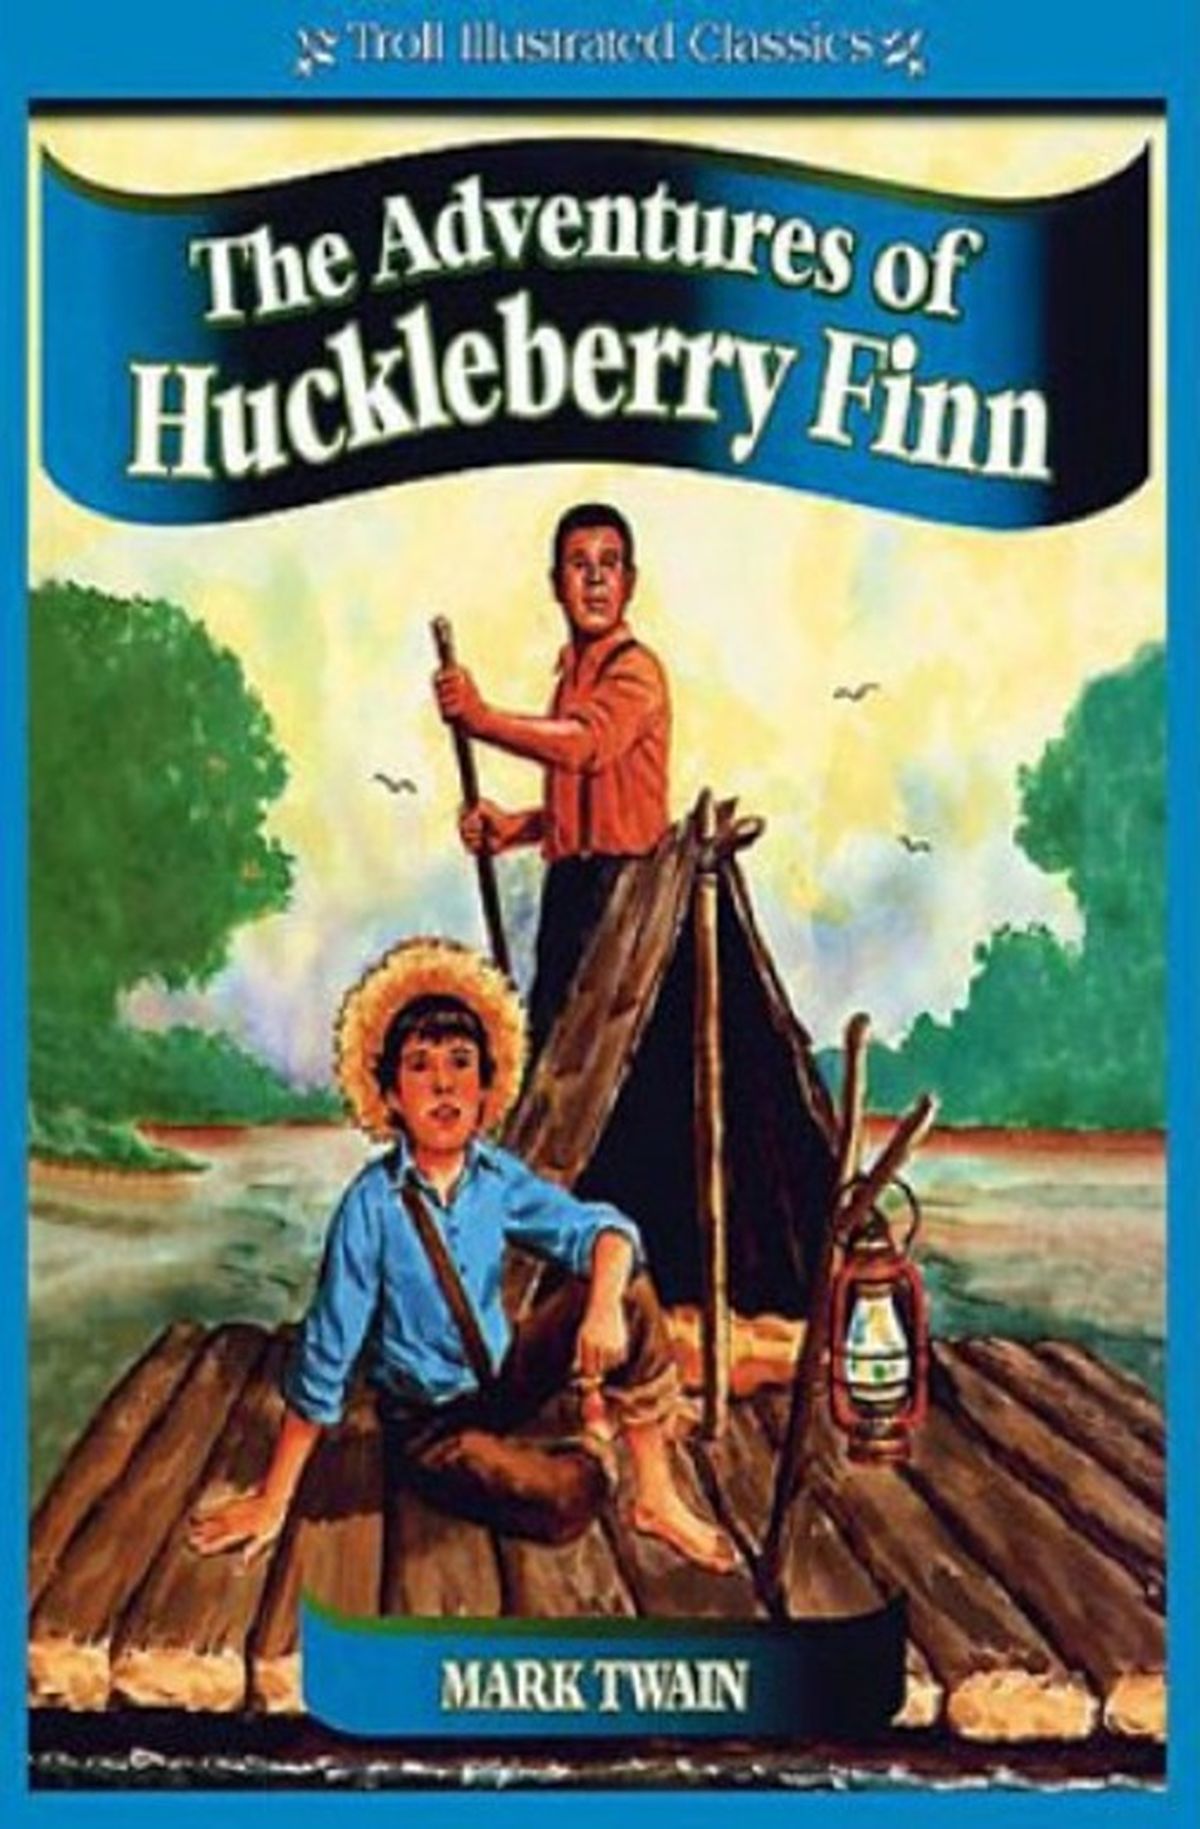 The Adventures of Huckleberry Finn for windows download free